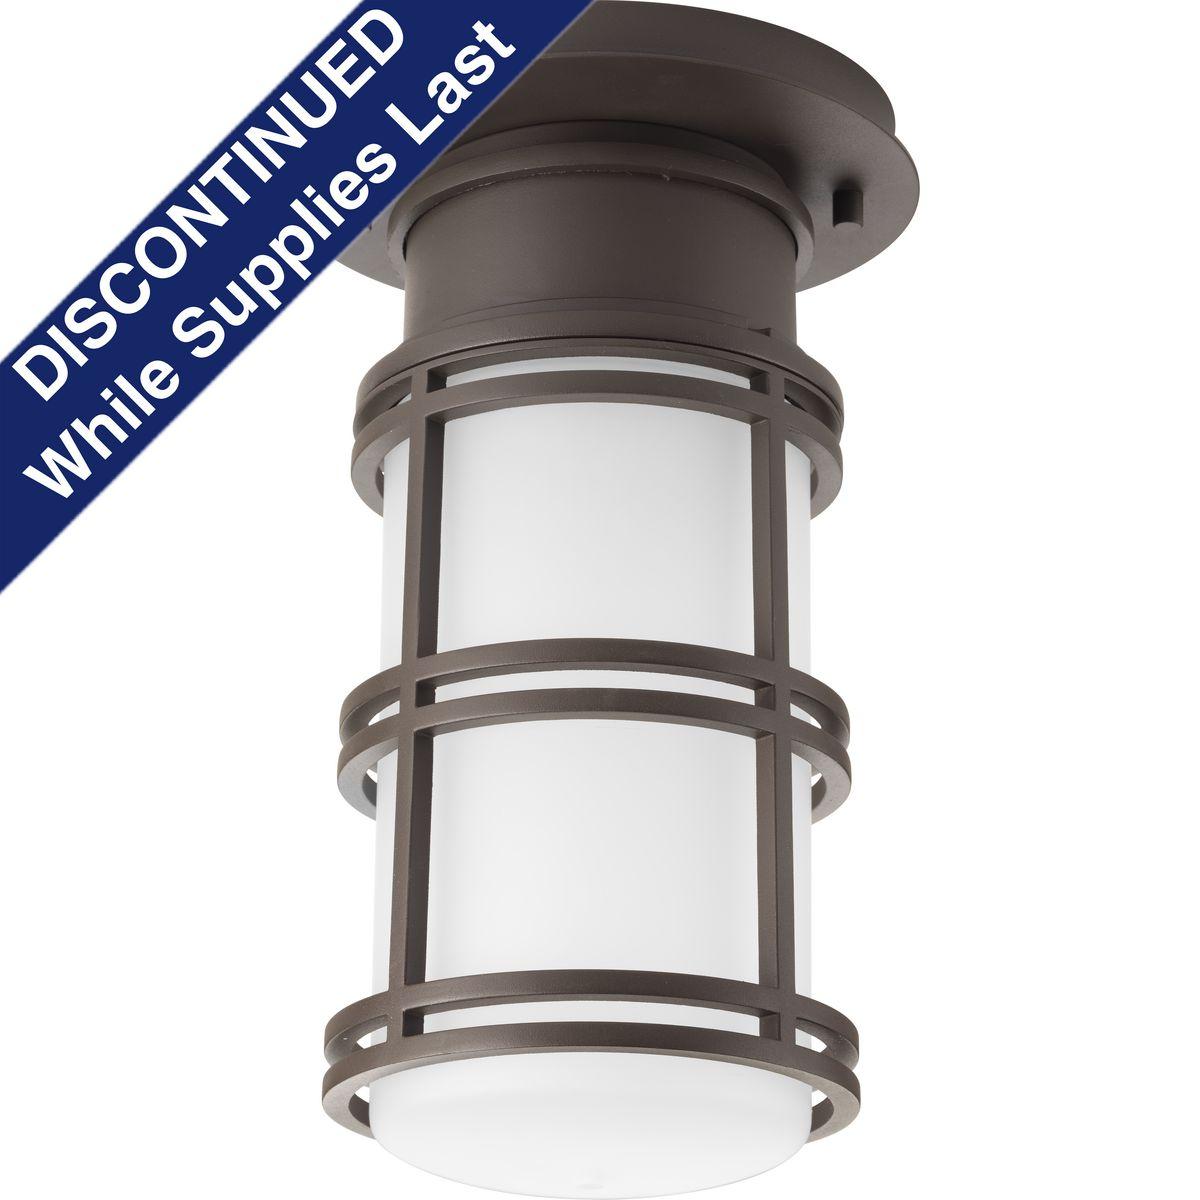 Hubbell P6536-2030K9 The one-light hanging lantern from the Belle LED Collection features nautical undertones and a cage reminiscent of industrial spaces that is ideal for both interior and exterior settings. This fixture is available in convertible ceiling/pendant and wall m